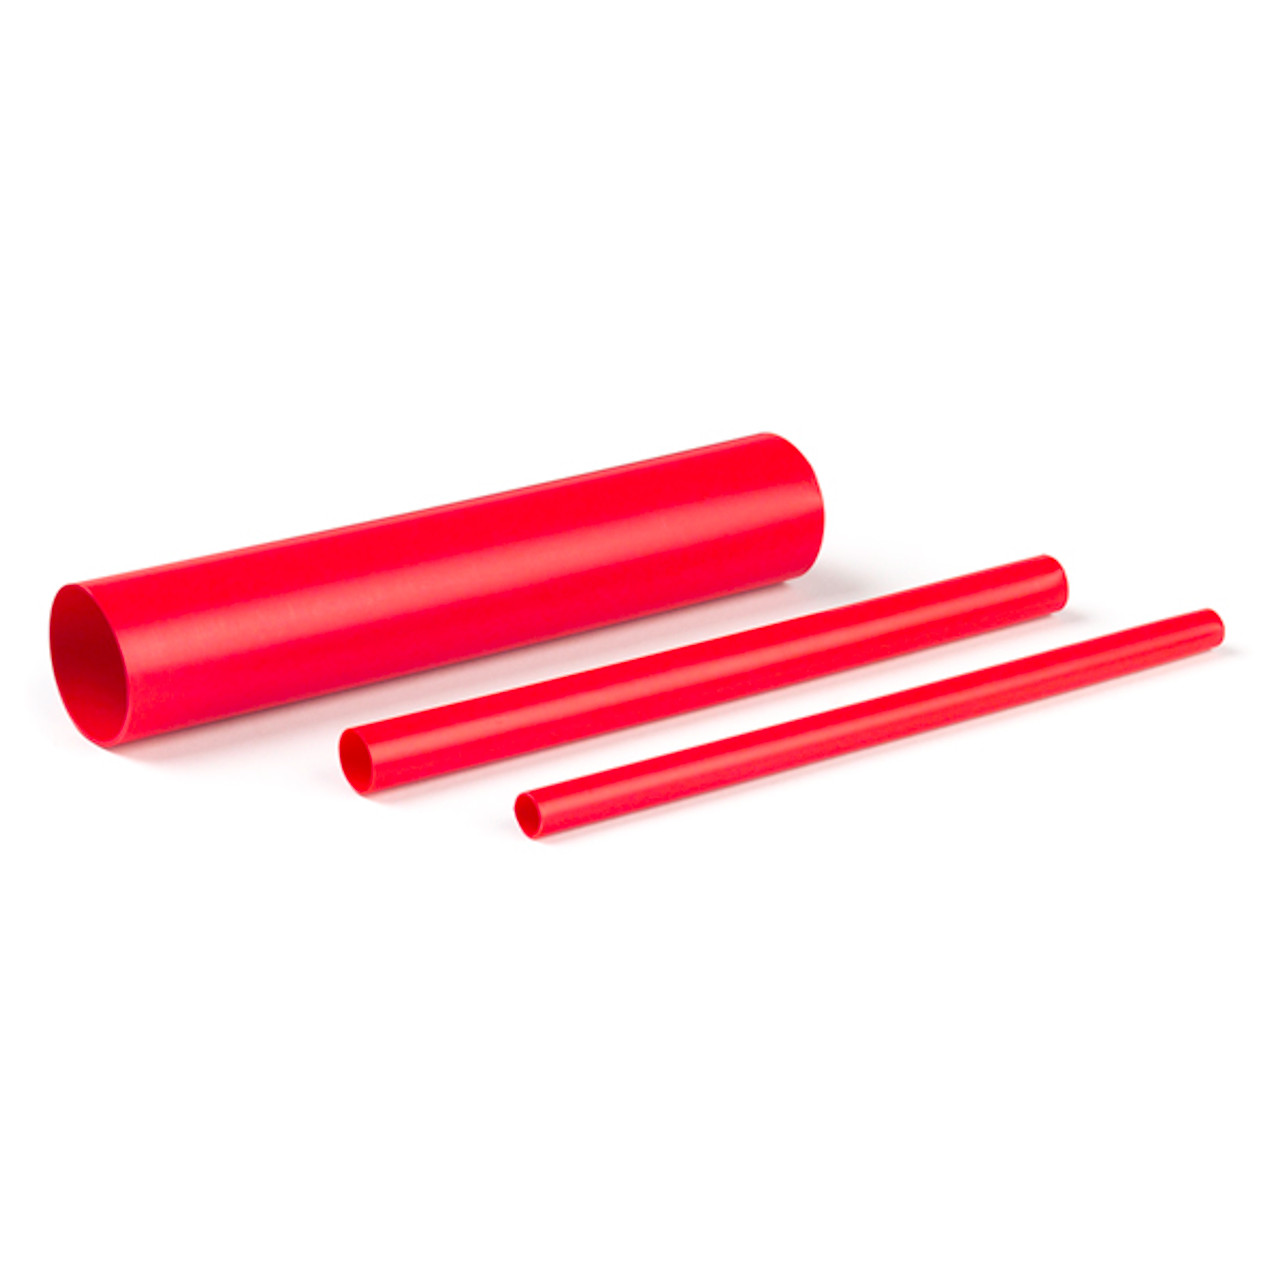 1" Dual Wall 3:1 Heat Shrink Tubing 48" @ 6 Pack - Red  84-6104-48